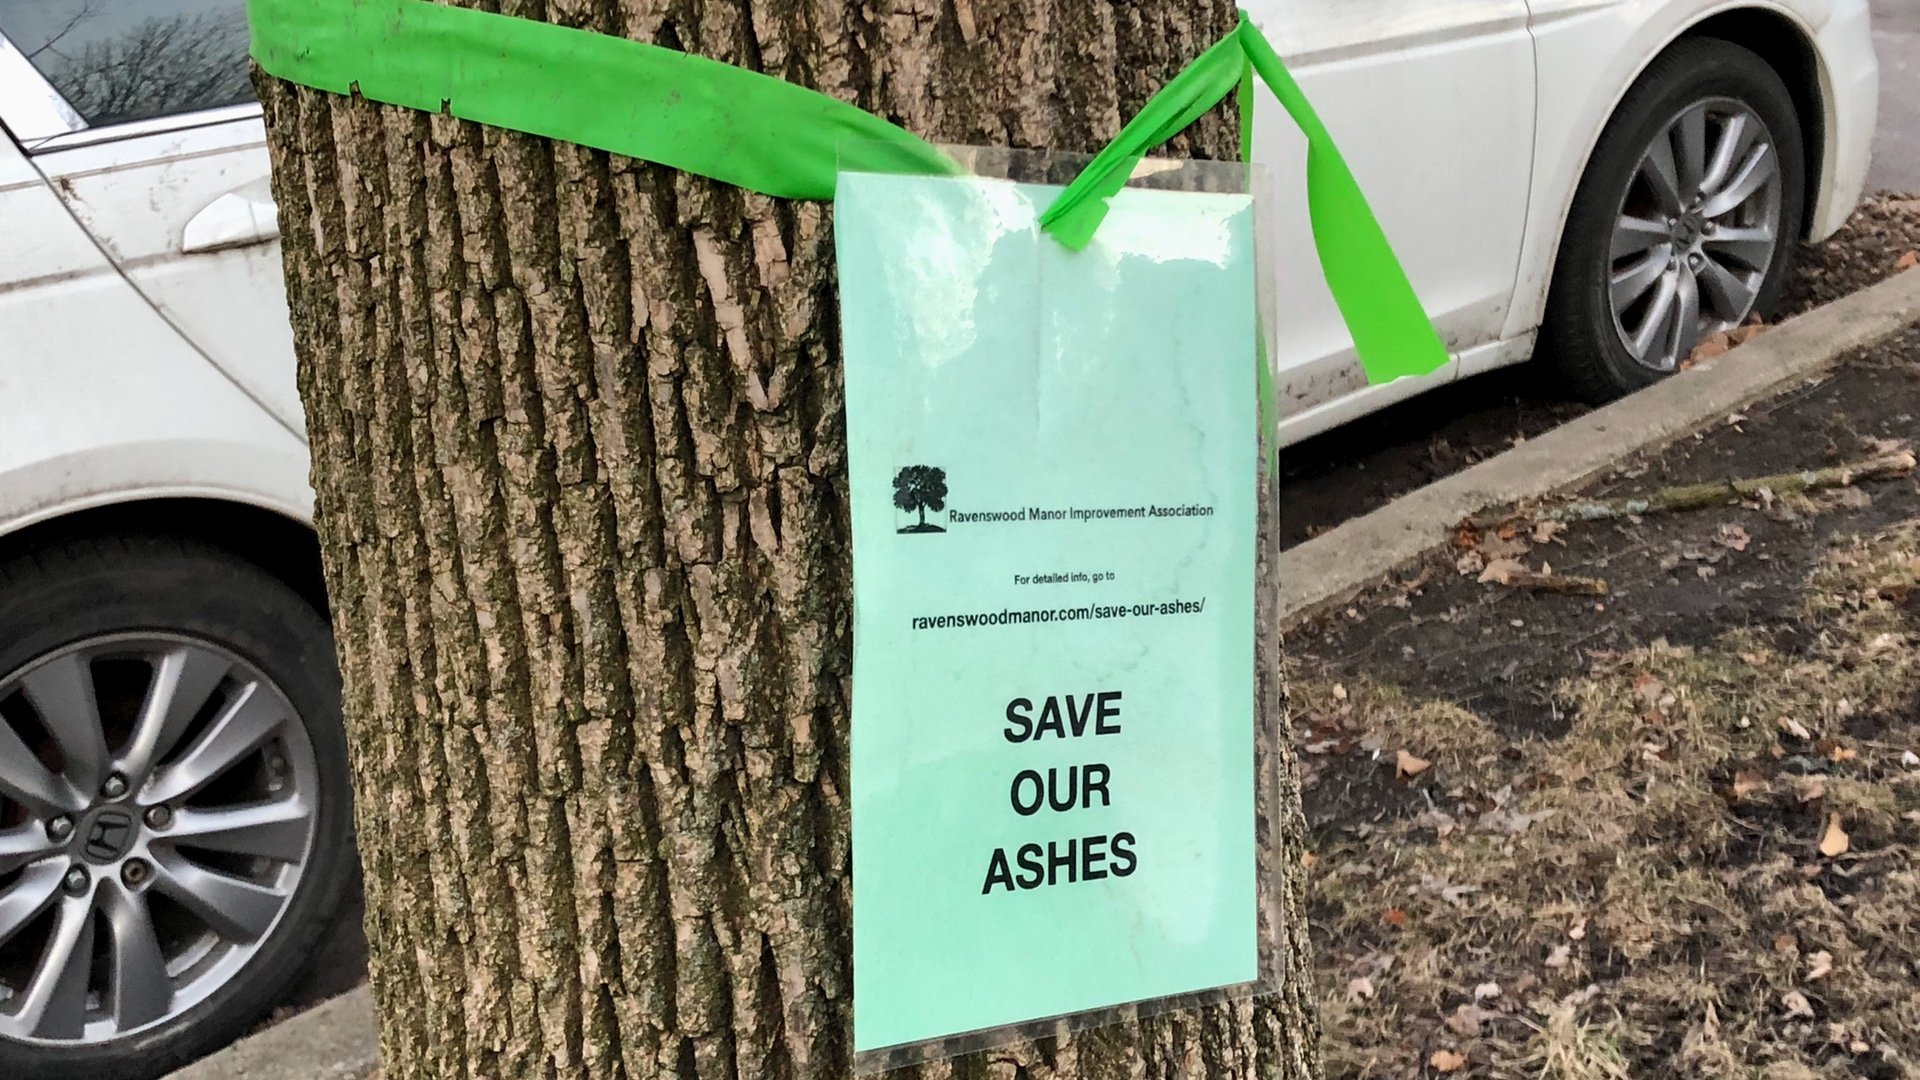 The City of Chicago has given up on treating parkway ash trees, so neighbors are taking it upon themselves. (Patty Wetli / WTTW News)